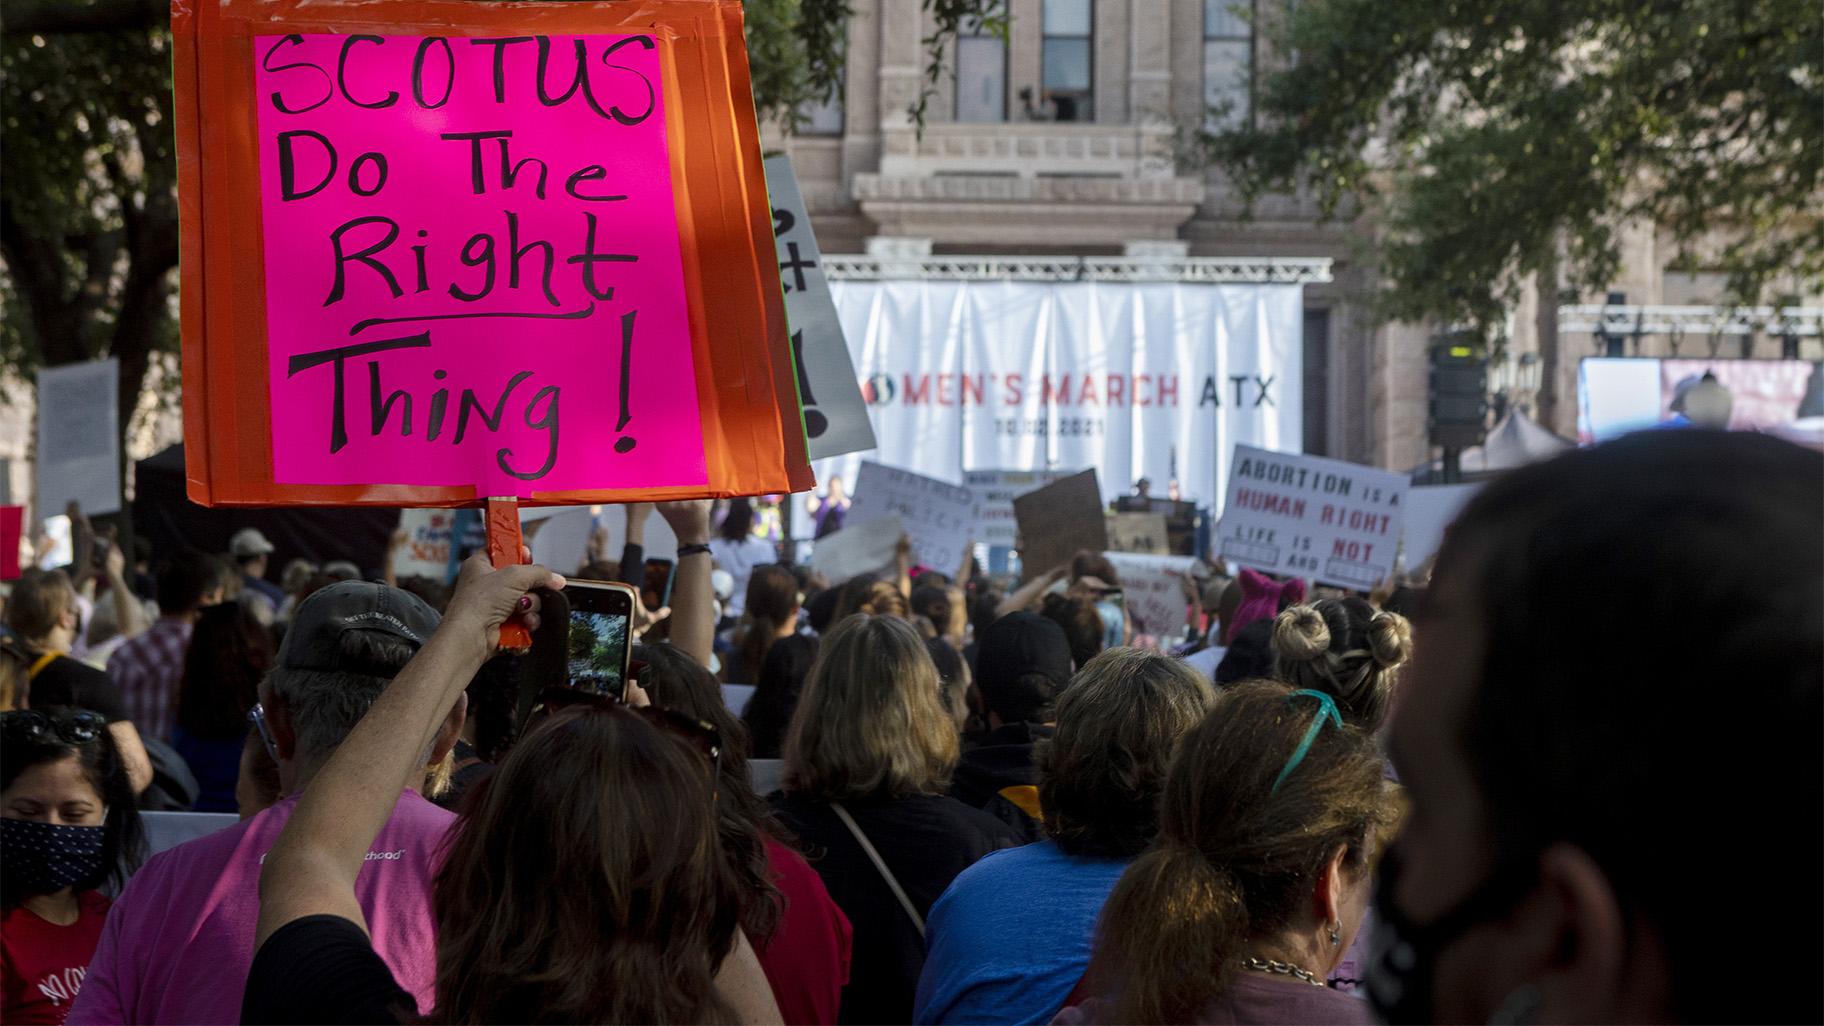 FILE - People attend the Women's March ATX rally, Oct., 2, 2021, at the Texas State Capitol in Austin, Texas. The Texas Supreme Court on Friday paved the way for the nation's toughest abortion law to remain in place in a ruling that again deflated clinics' hopes of stopping — or even pausing — the restrictions anytime soon. (AP Photo / Stephen Spillman, File)